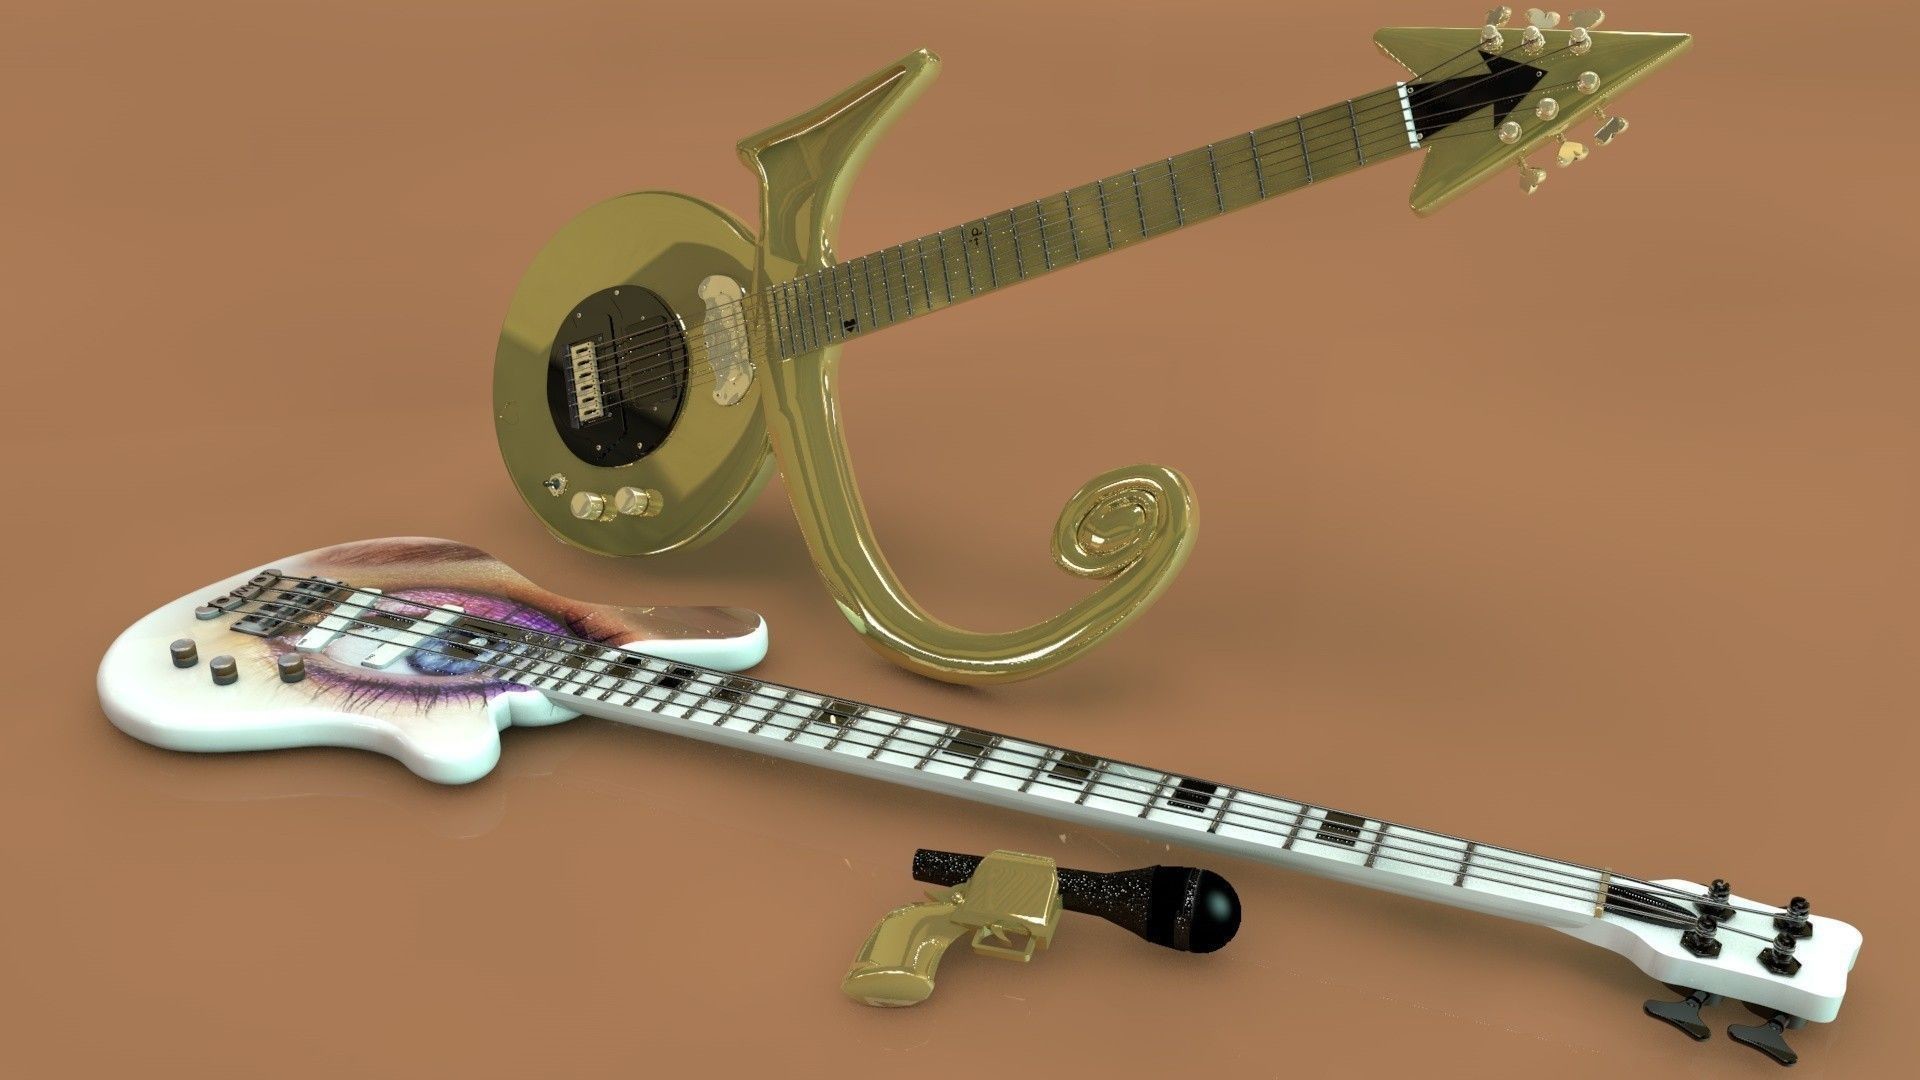 1920x1080 ... prince symbol guitar and eye bass 3d model obj 3ds c4d dxf 3 ...